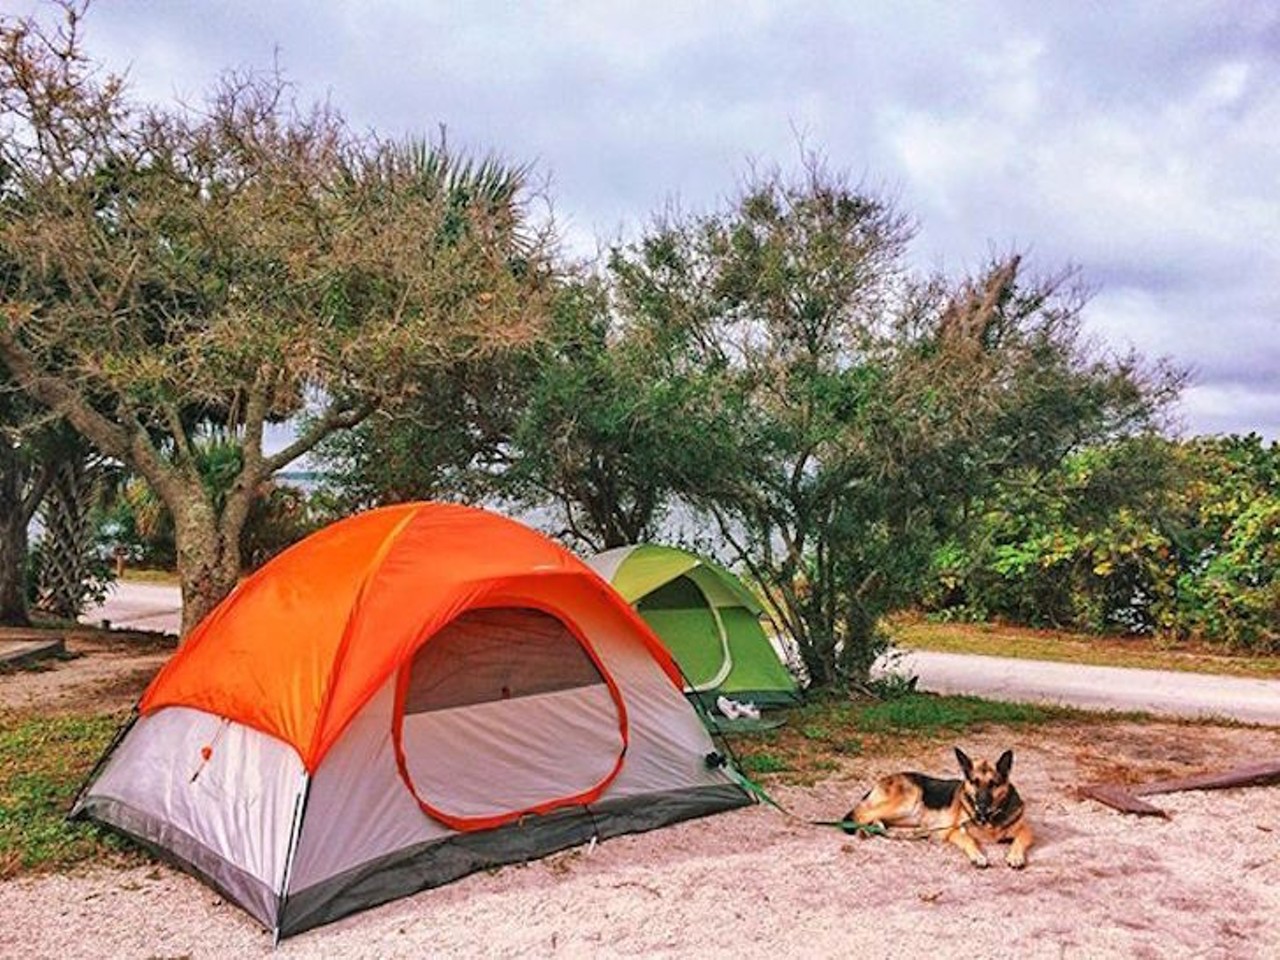 Sebastian Inlet State Park
9700 South Highway A.1.A., Melbourne Beach, Fla. 32951 | 321-984-4852
Head on over to Florida&#146;s finest saltwater camping grounds where you can catch yourself something delicious for dinner. Barbecue it, boil it, broil it, bake it, saute it-- you call the shots in the wilderness.
Photo via jeanmariebiele on Instagram